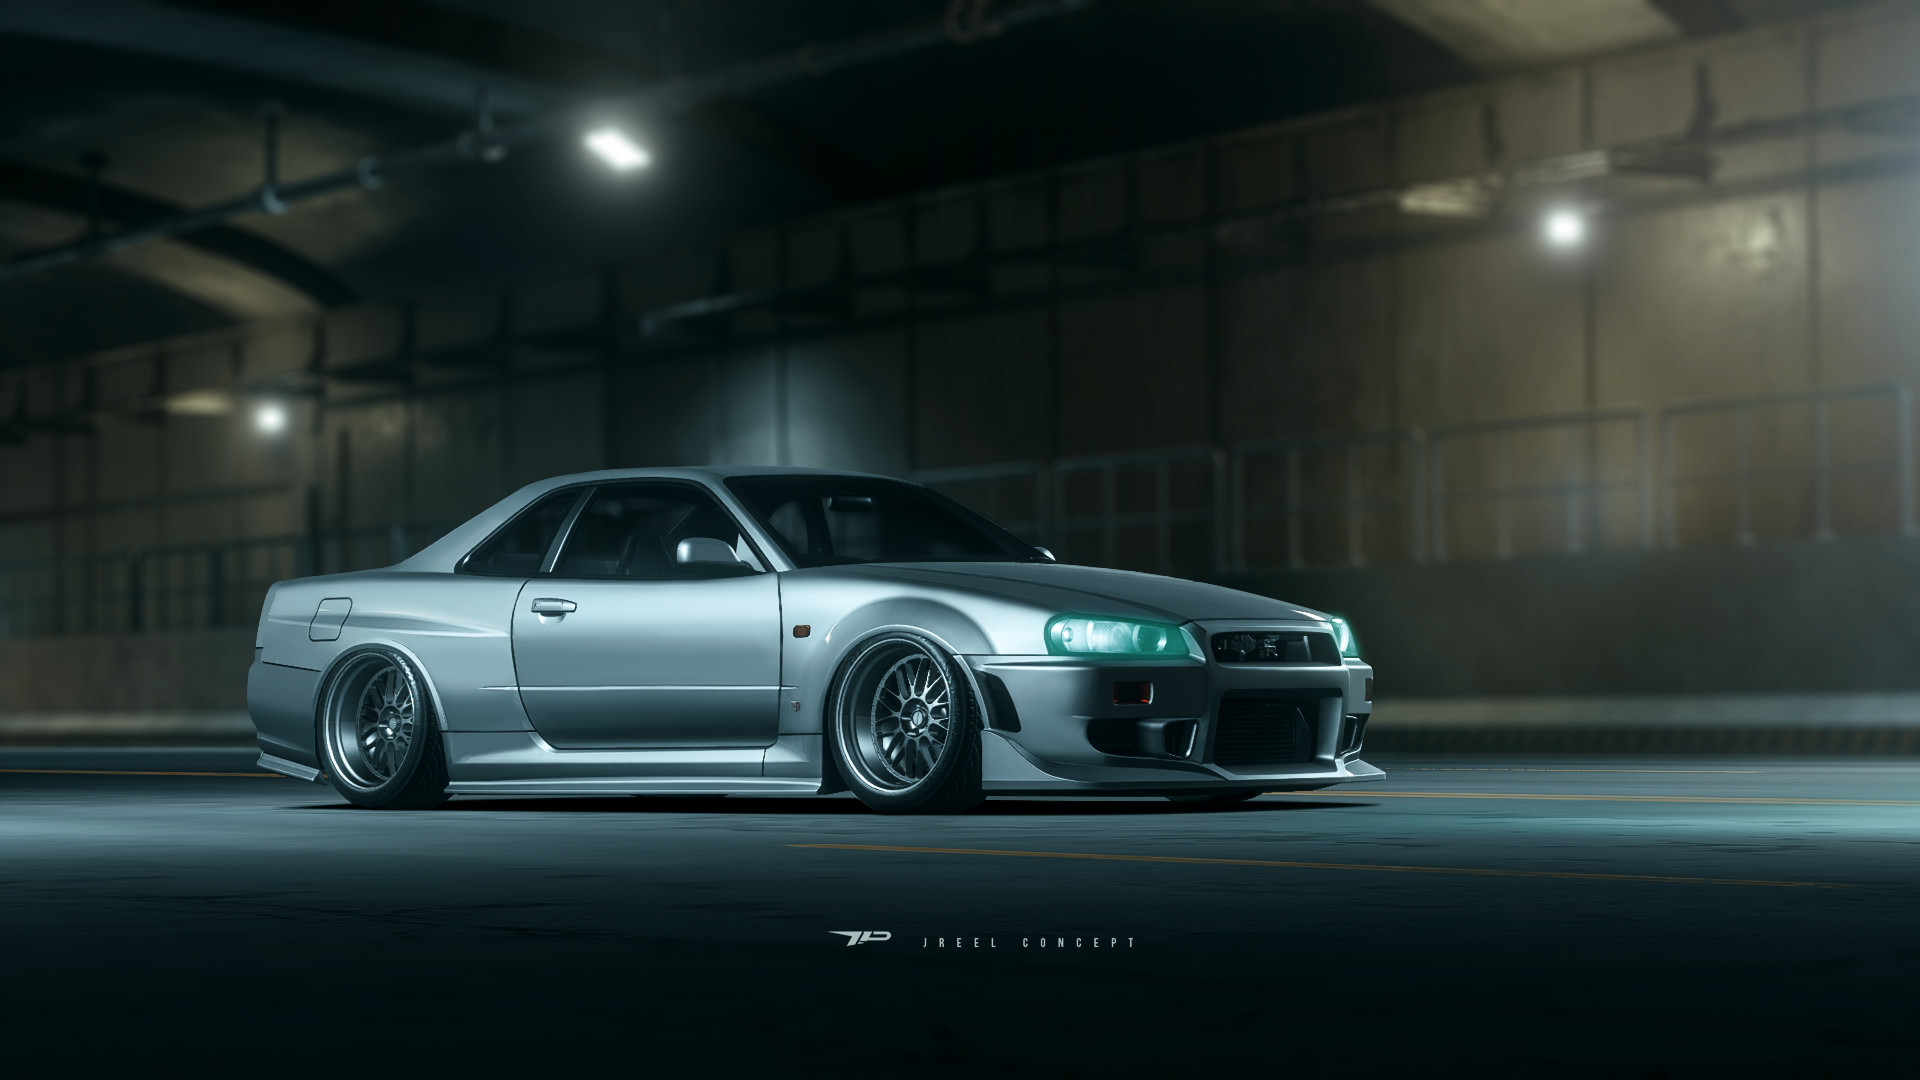 nissan skyline r34, video game, need for speed payback, nissan skyline, nissan, need for speed